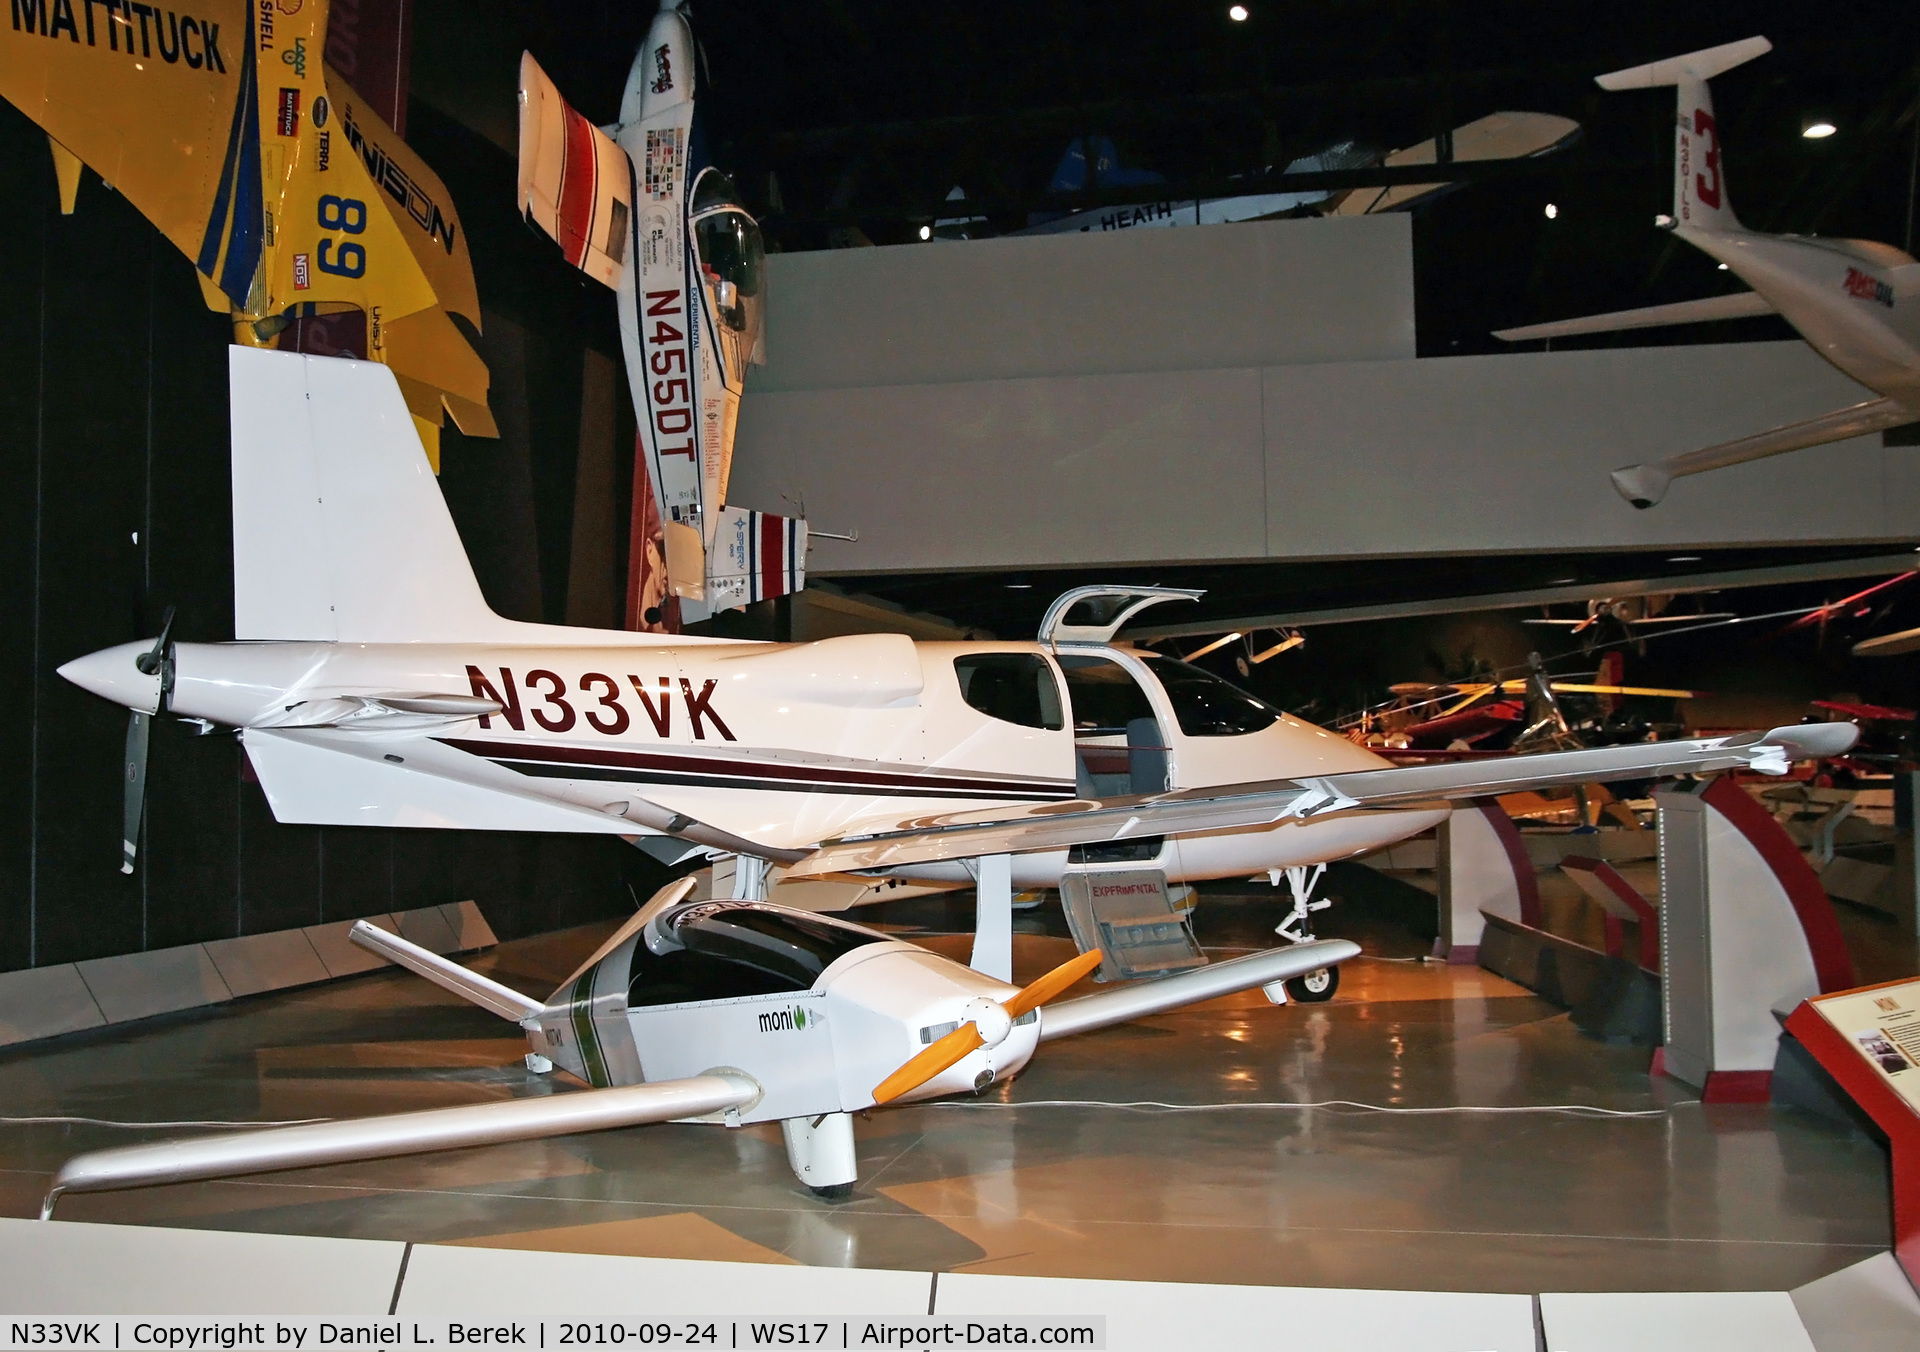 N33VK, 1991 Cirrus VK30 C/N 005, This was the very first Cirrus design, leading to a legacy of popular and sporty aircraft.  It was offered as a kit but is unusual in that it is a large 5-place machine.